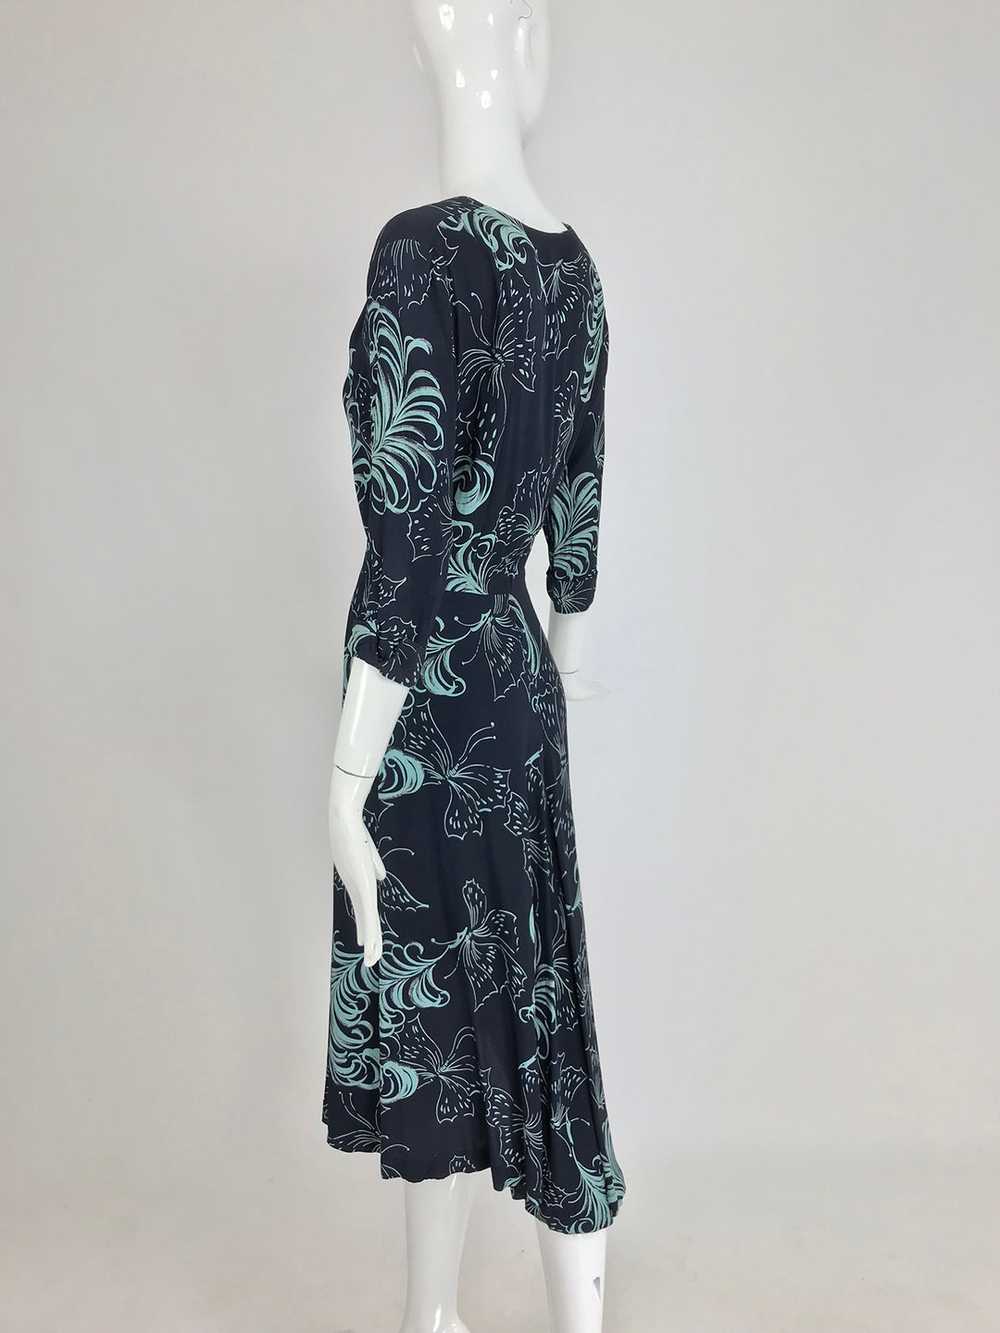 1940s Plume and Butterfly Rayon Print Day Dress - image 5